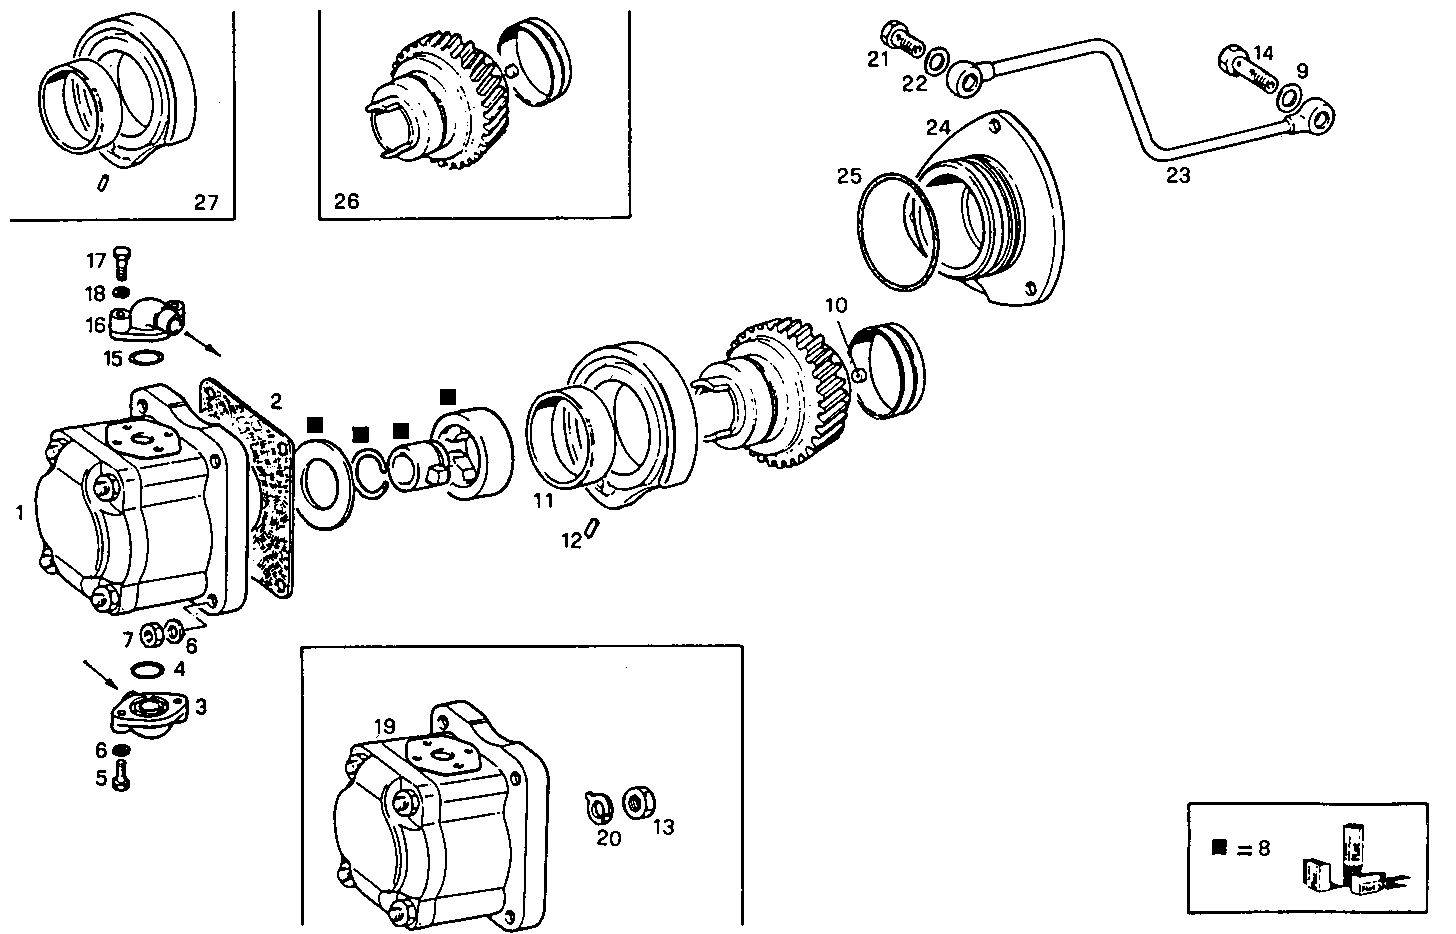 LOW FRONT HYDRAULIC PUMP